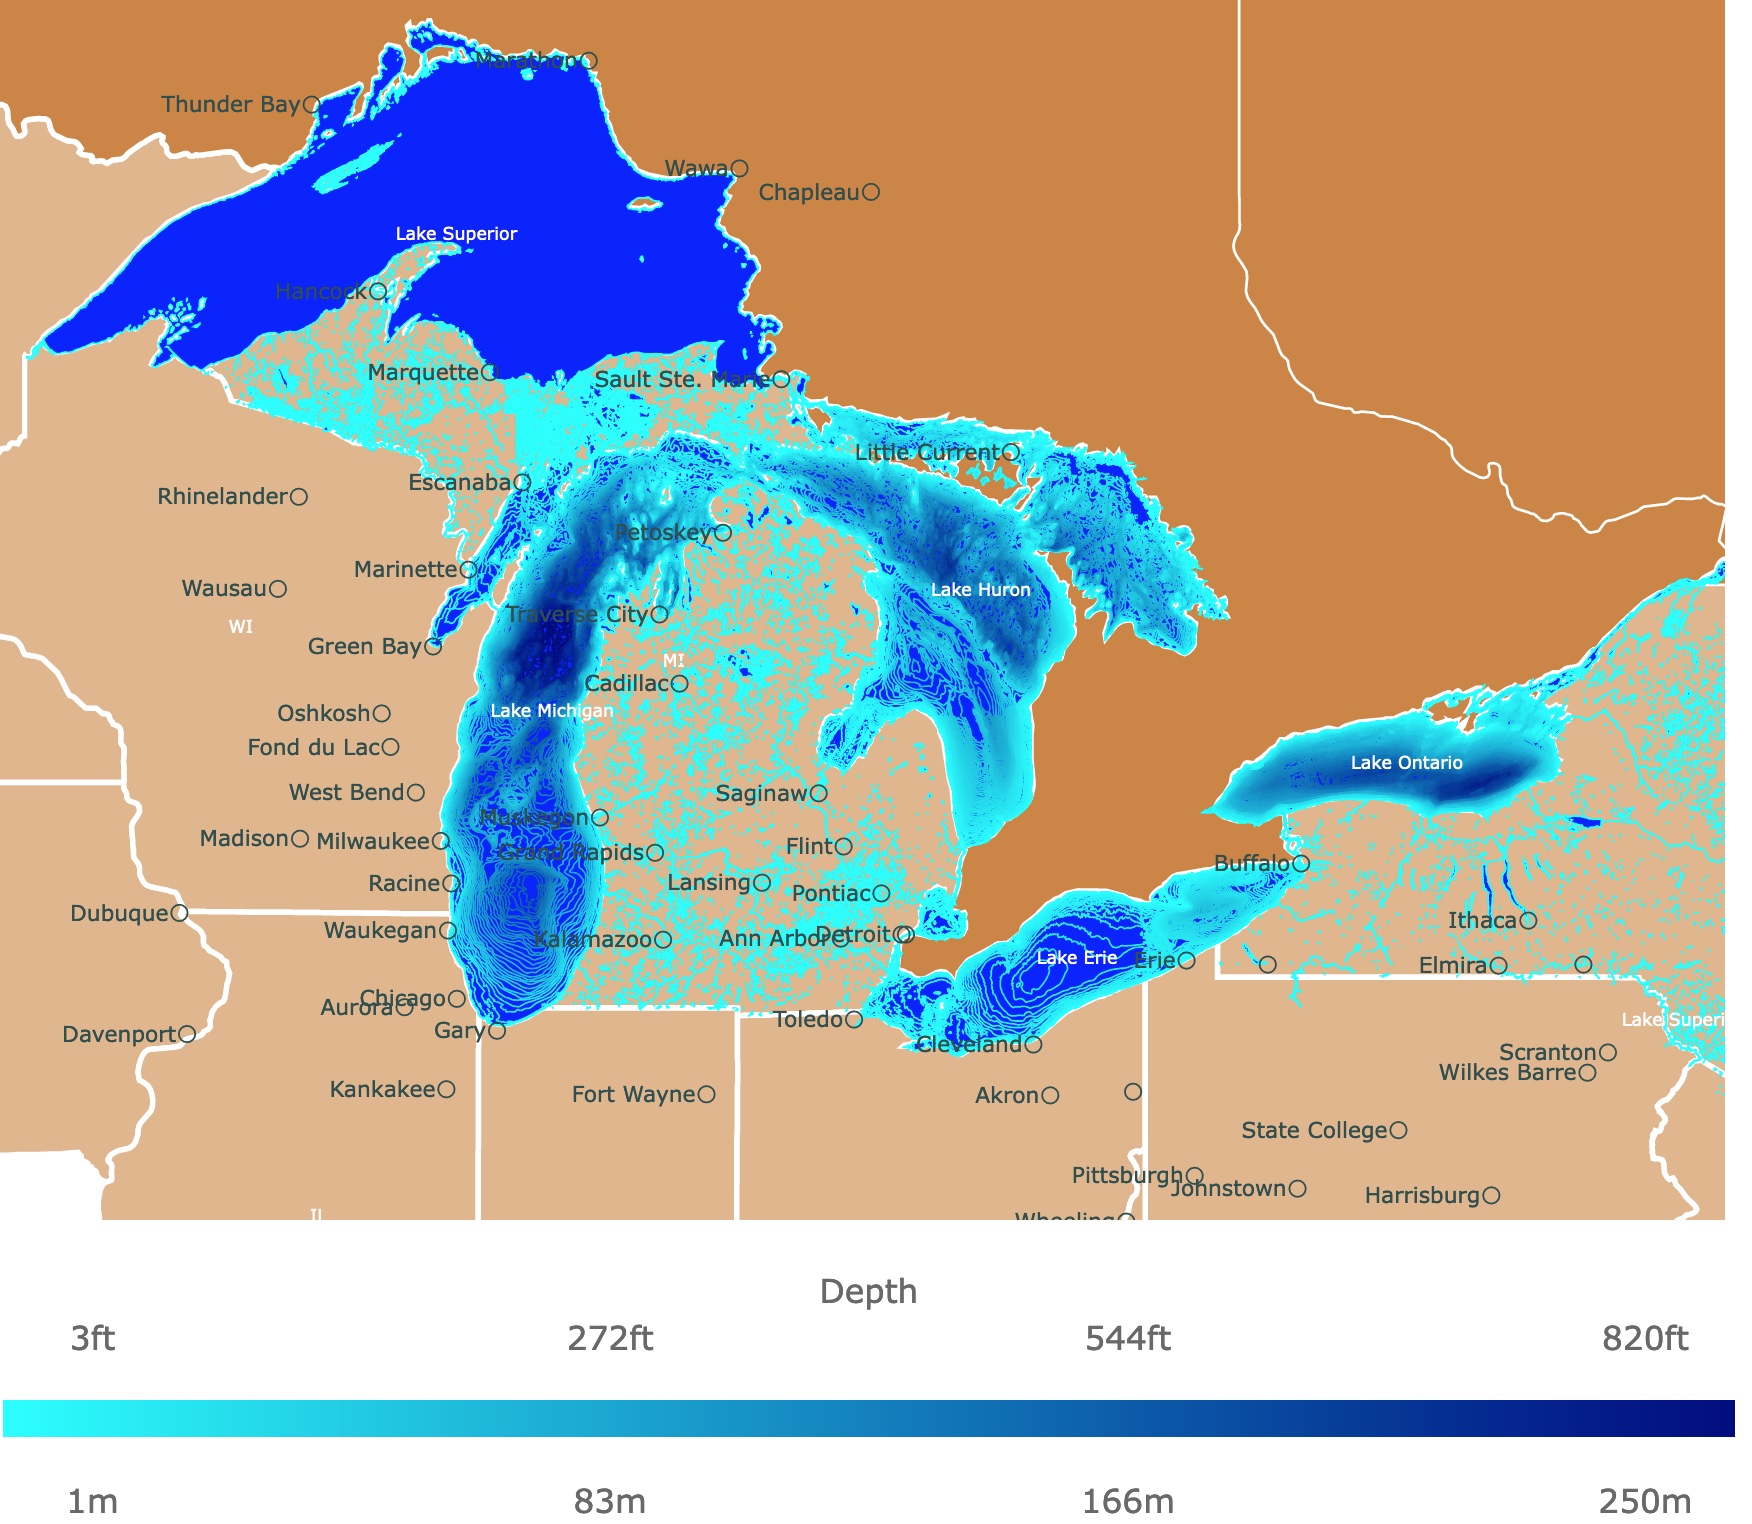 Map of the Great Lakes and their depths